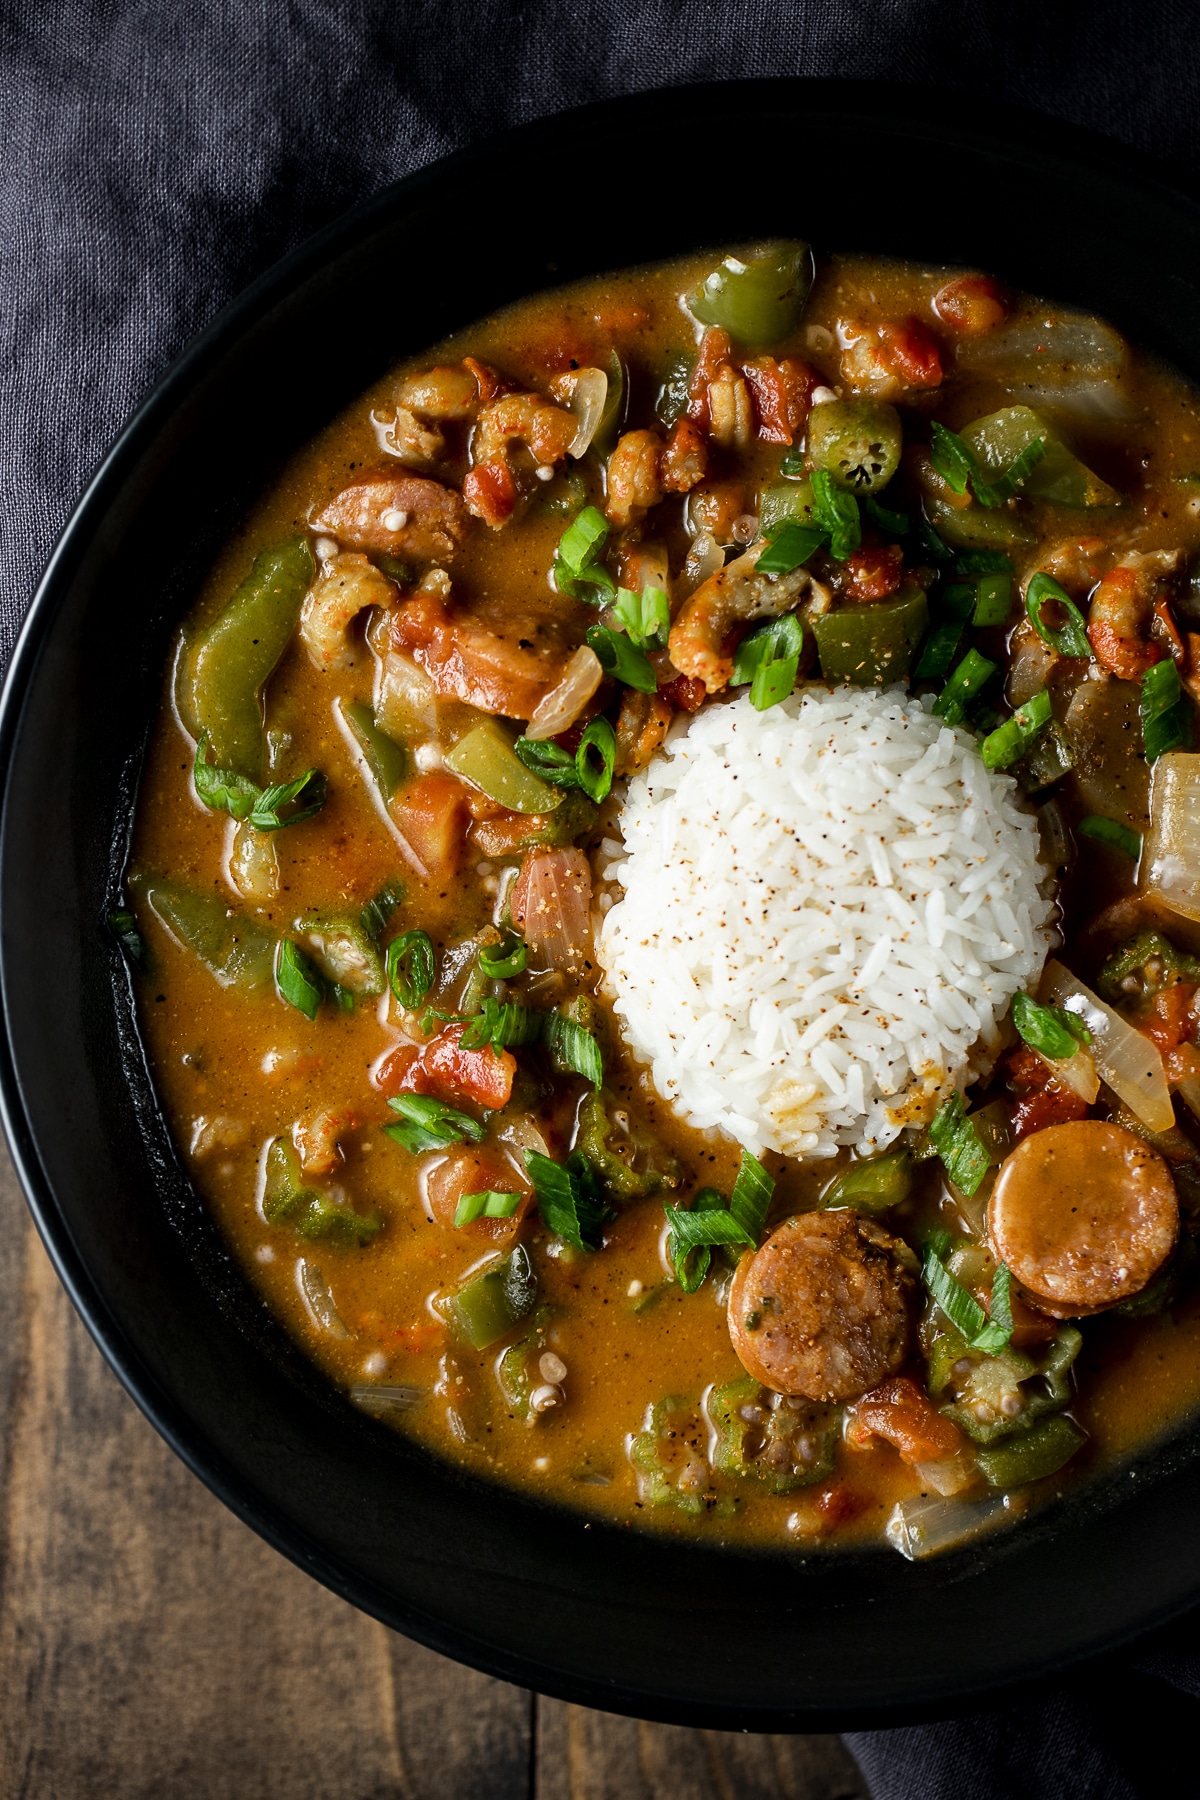 Crawfish gumbo served over rice in a black bowl.